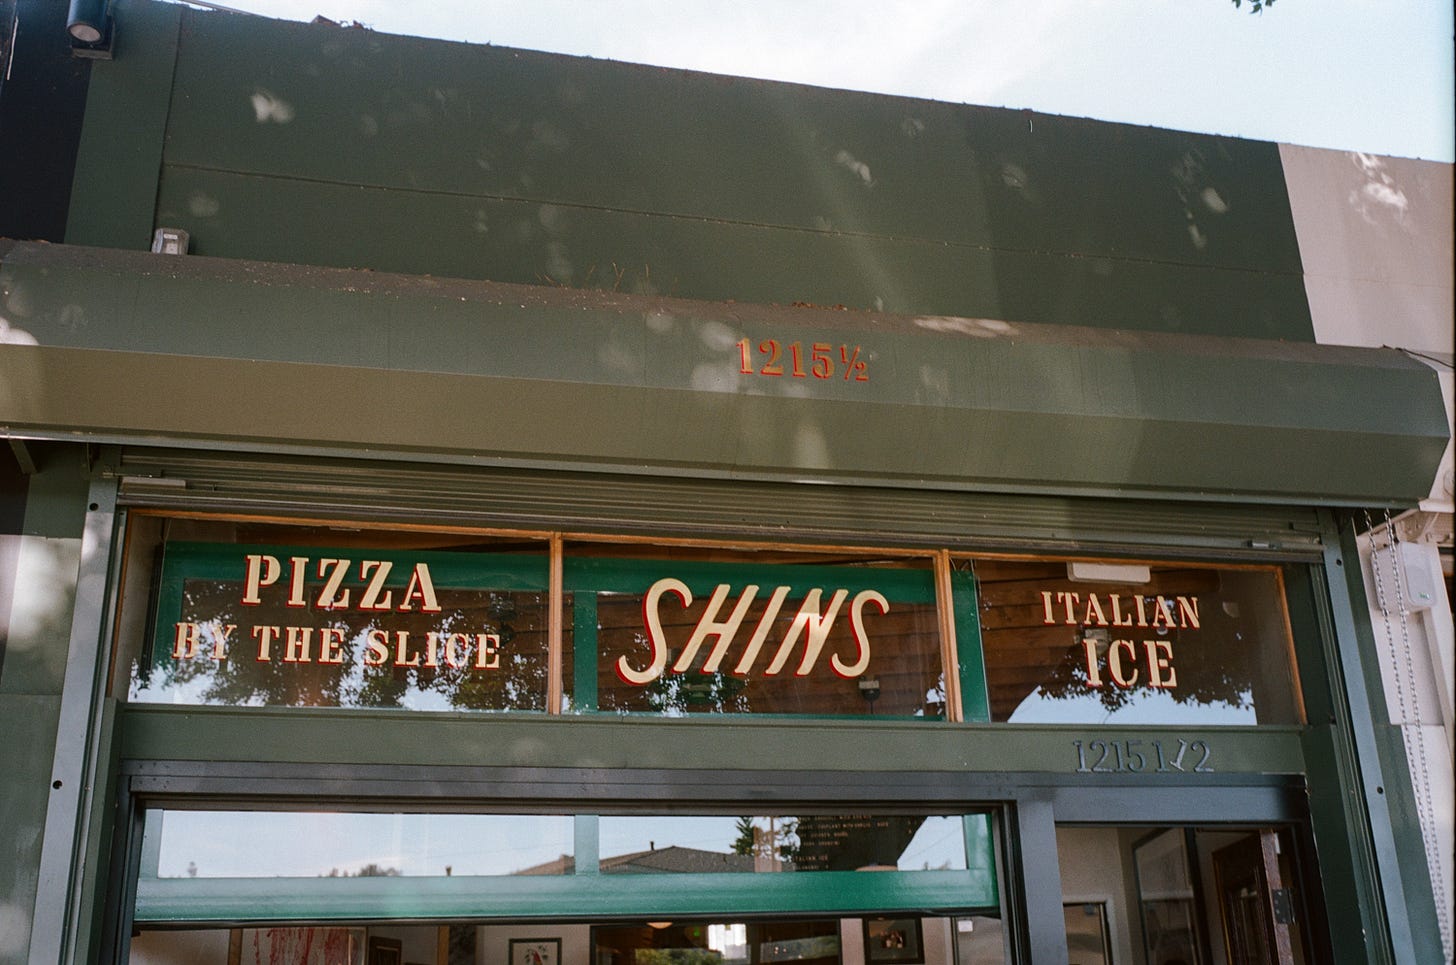 Handpainted signage on Shins Pizza's storefront